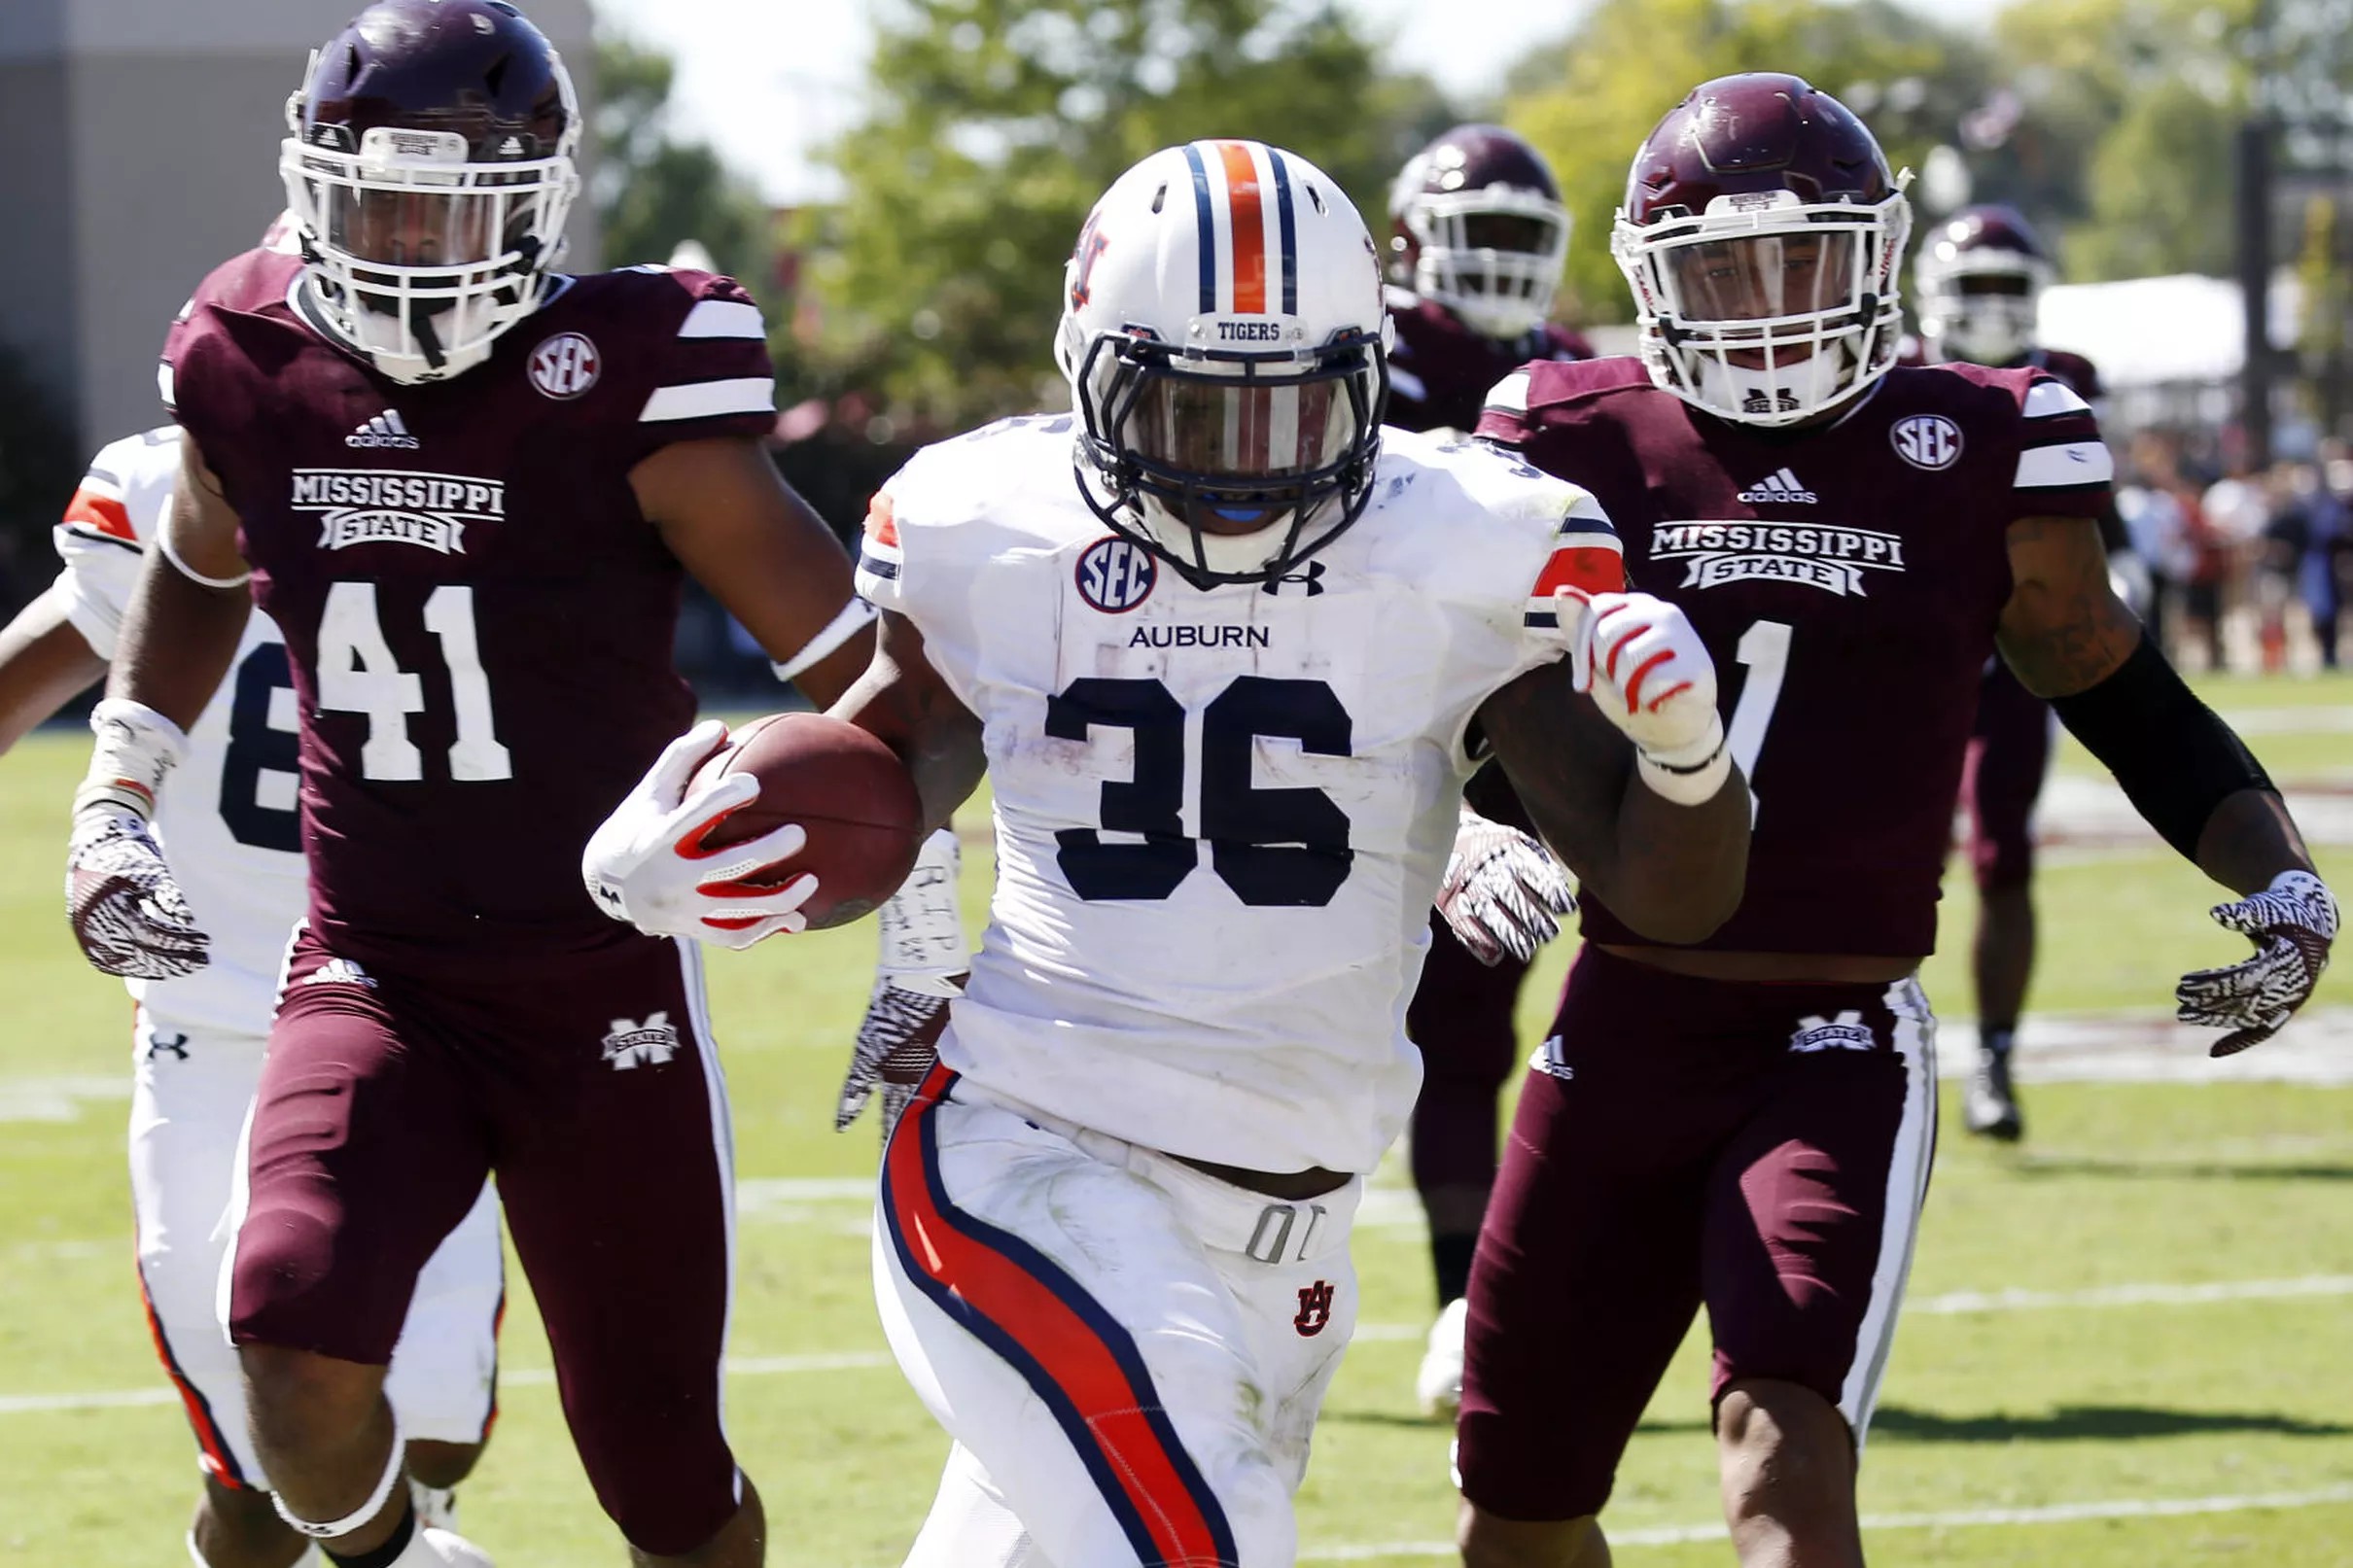 How to Watch and Listen Auburn vs Mississippi State